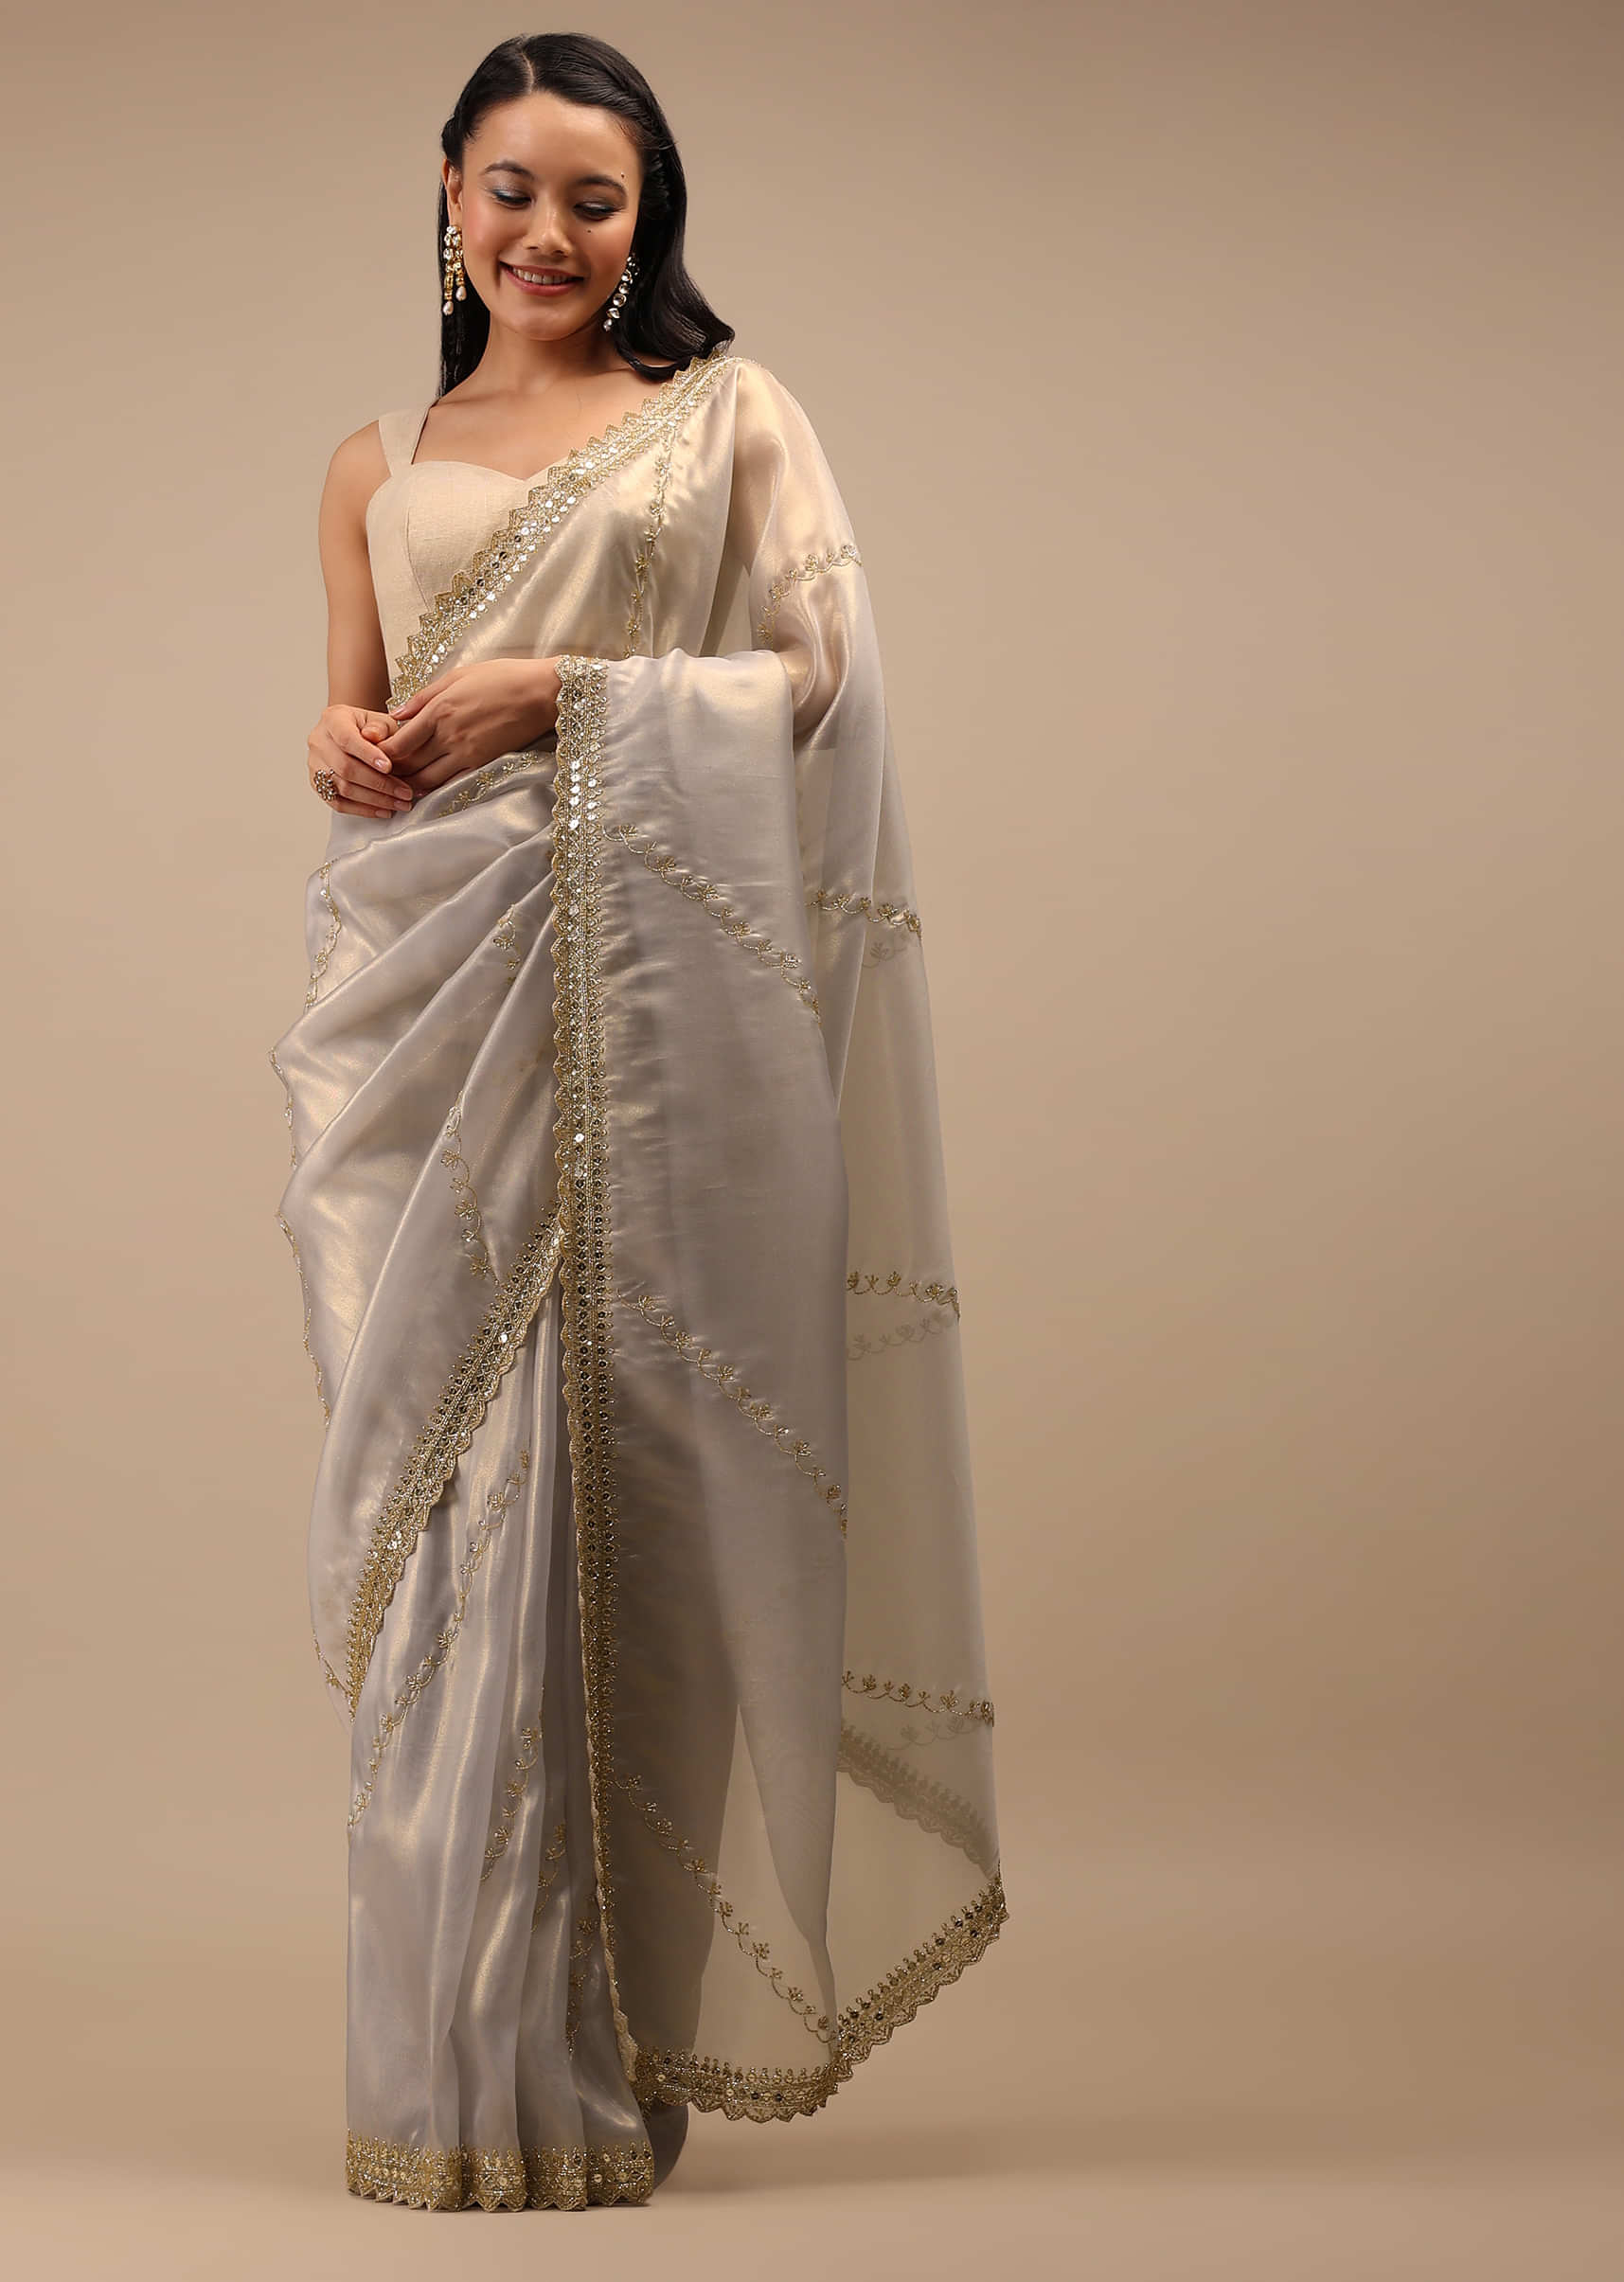 Lilac Grey Glass Tissue Saree In Golden Cut Dana Embroidery Buttis, Cutwork Detailing On The Border With Cut Dana Embroidery